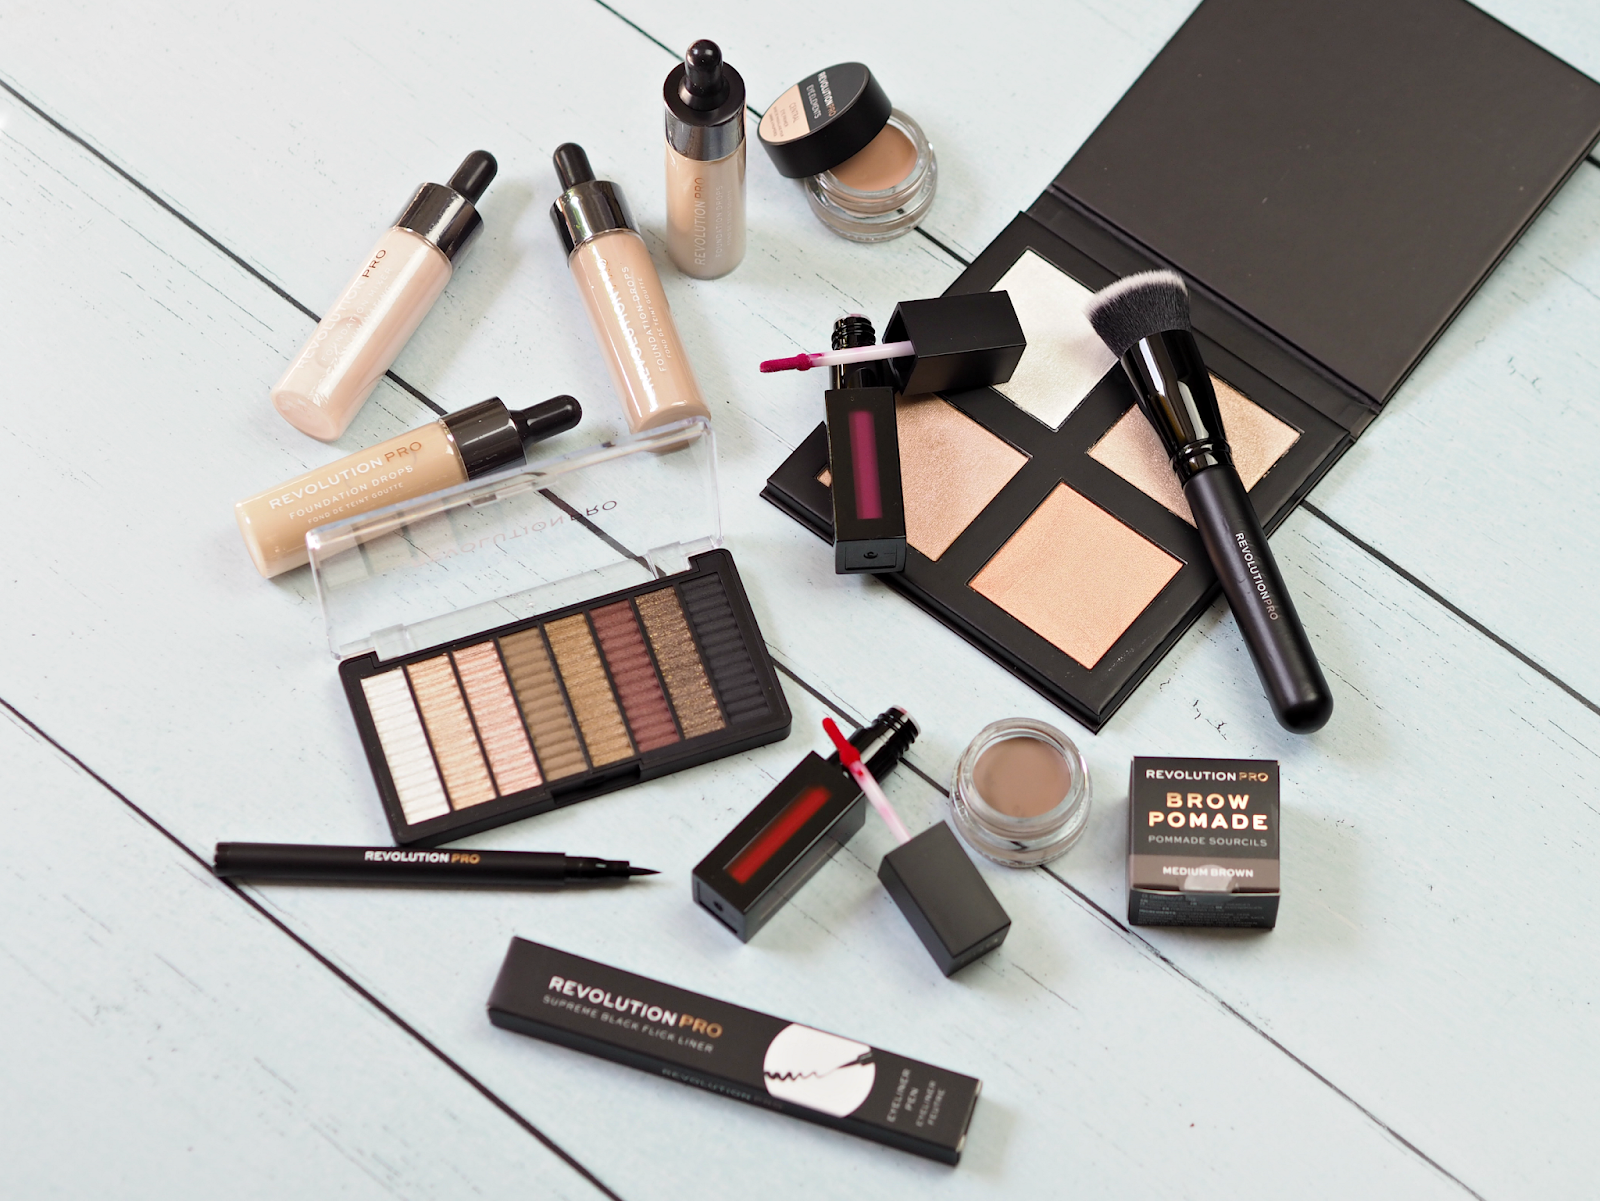 Makeup Revolution Launches A 'Pro' Range You'll Want To Get Your Hands On (Plus My Top Picks)